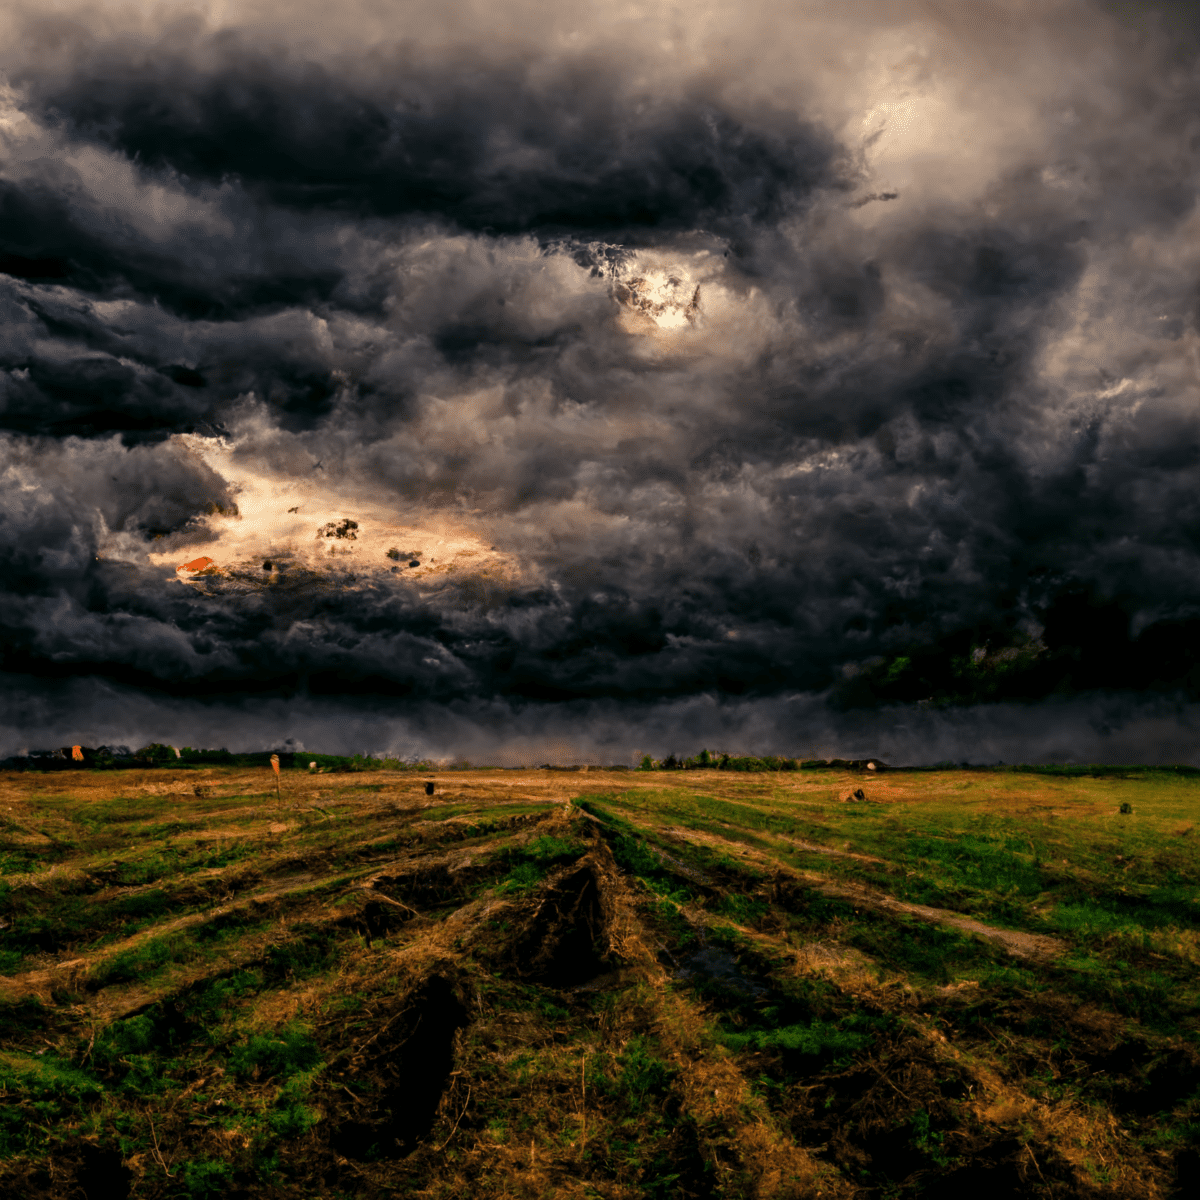 An empty field under a dark and brooding sky.